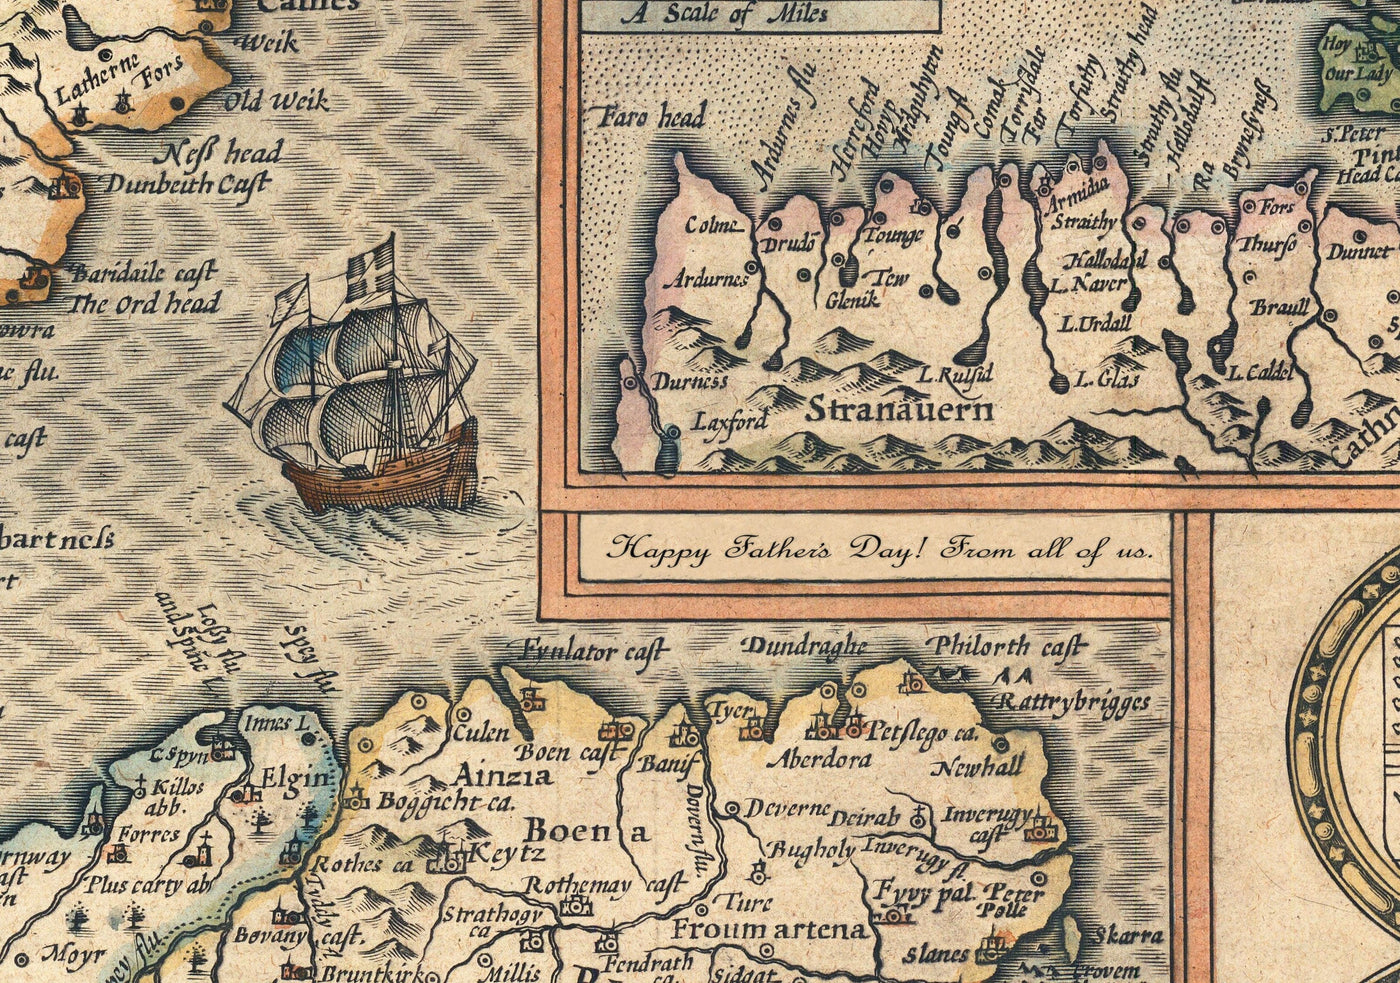 Old Map of Anglesey Wales, 1611 by John Speed - Holyhead, Llanfairpwllgwyngyll, Bangor